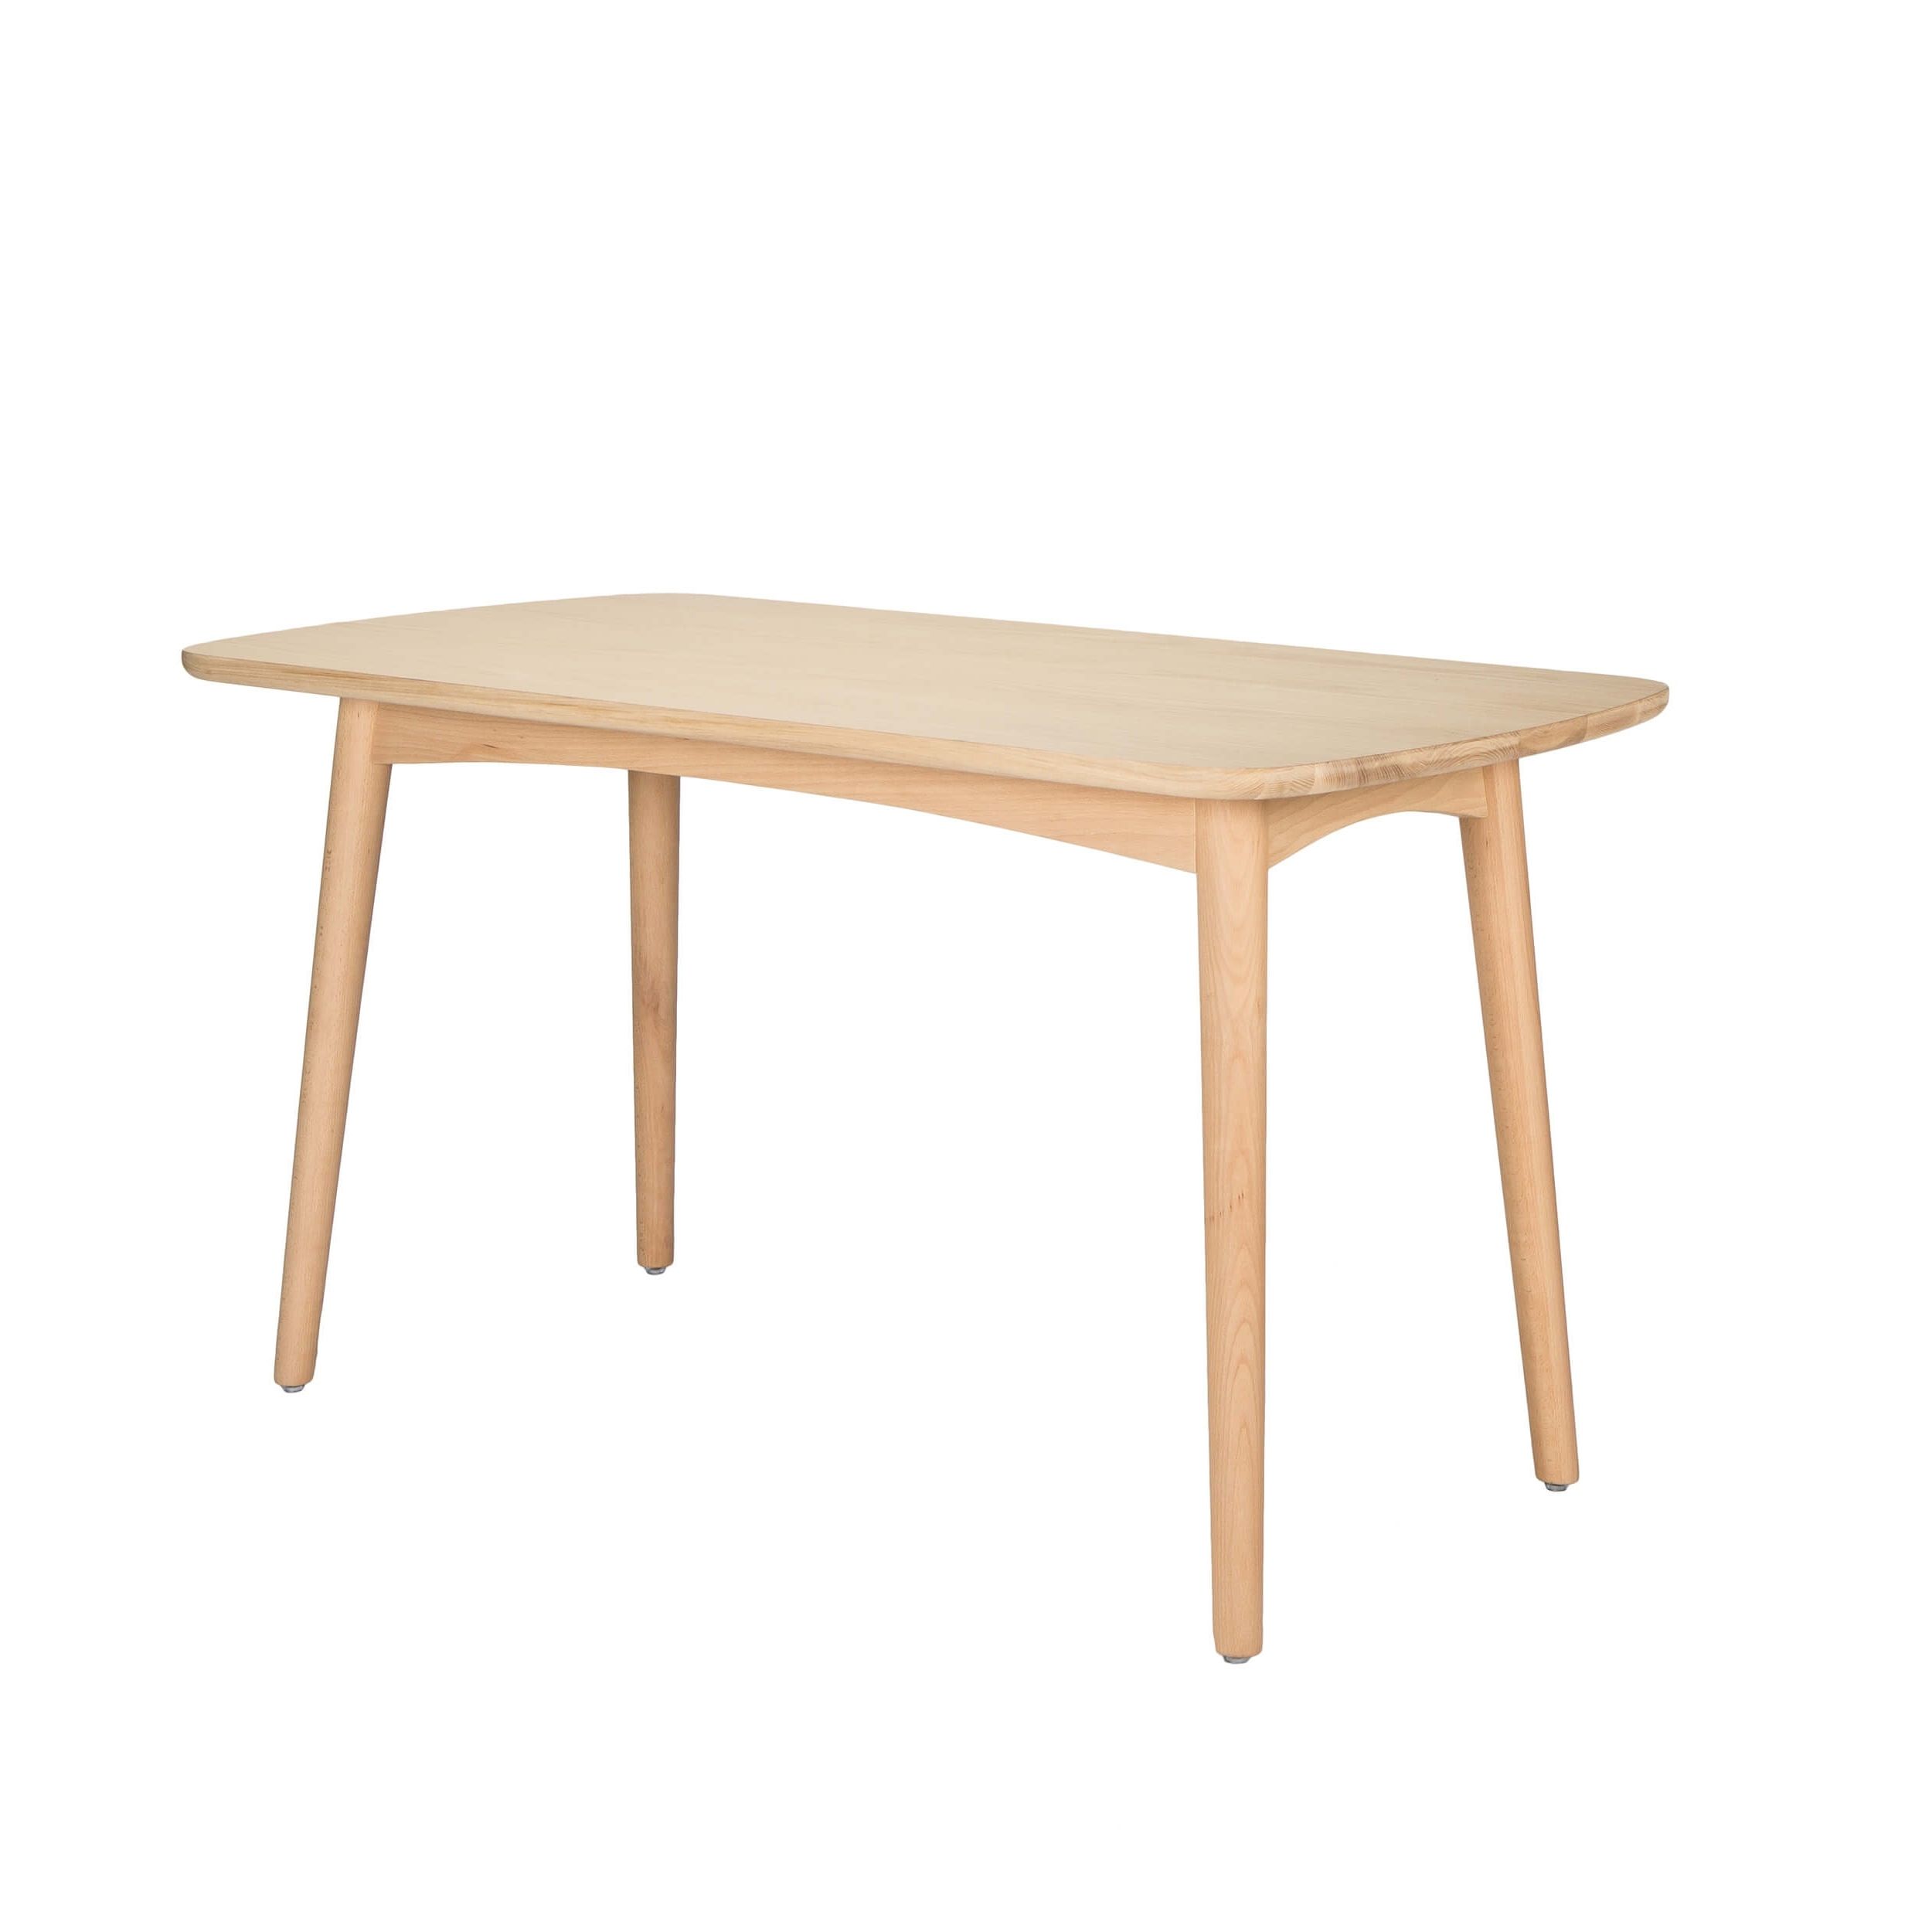 Most Recently Released Cullen Wood Dining Table – Seats 6 – Light Natural With Wood Dining Tables (View 19 of 25)